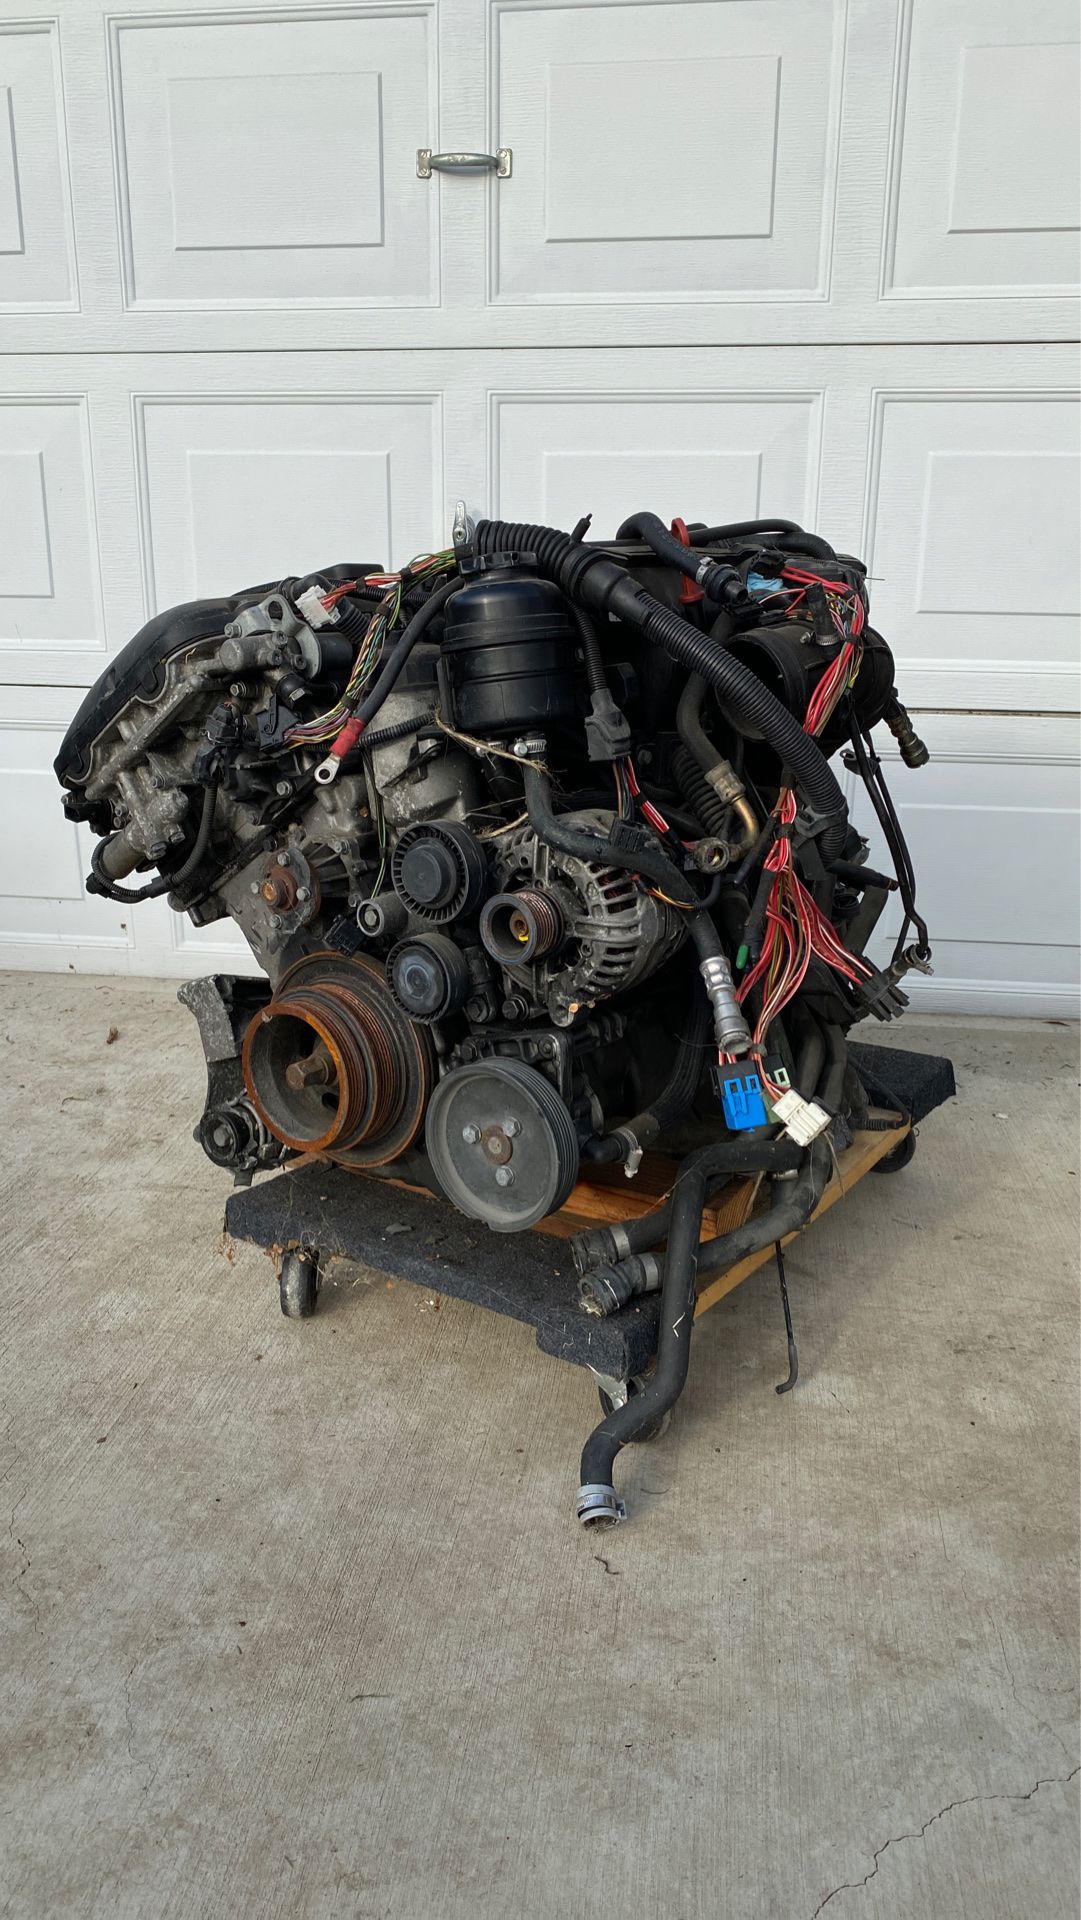 BMW M54 engine e46 3 series from 2006 325i coupe